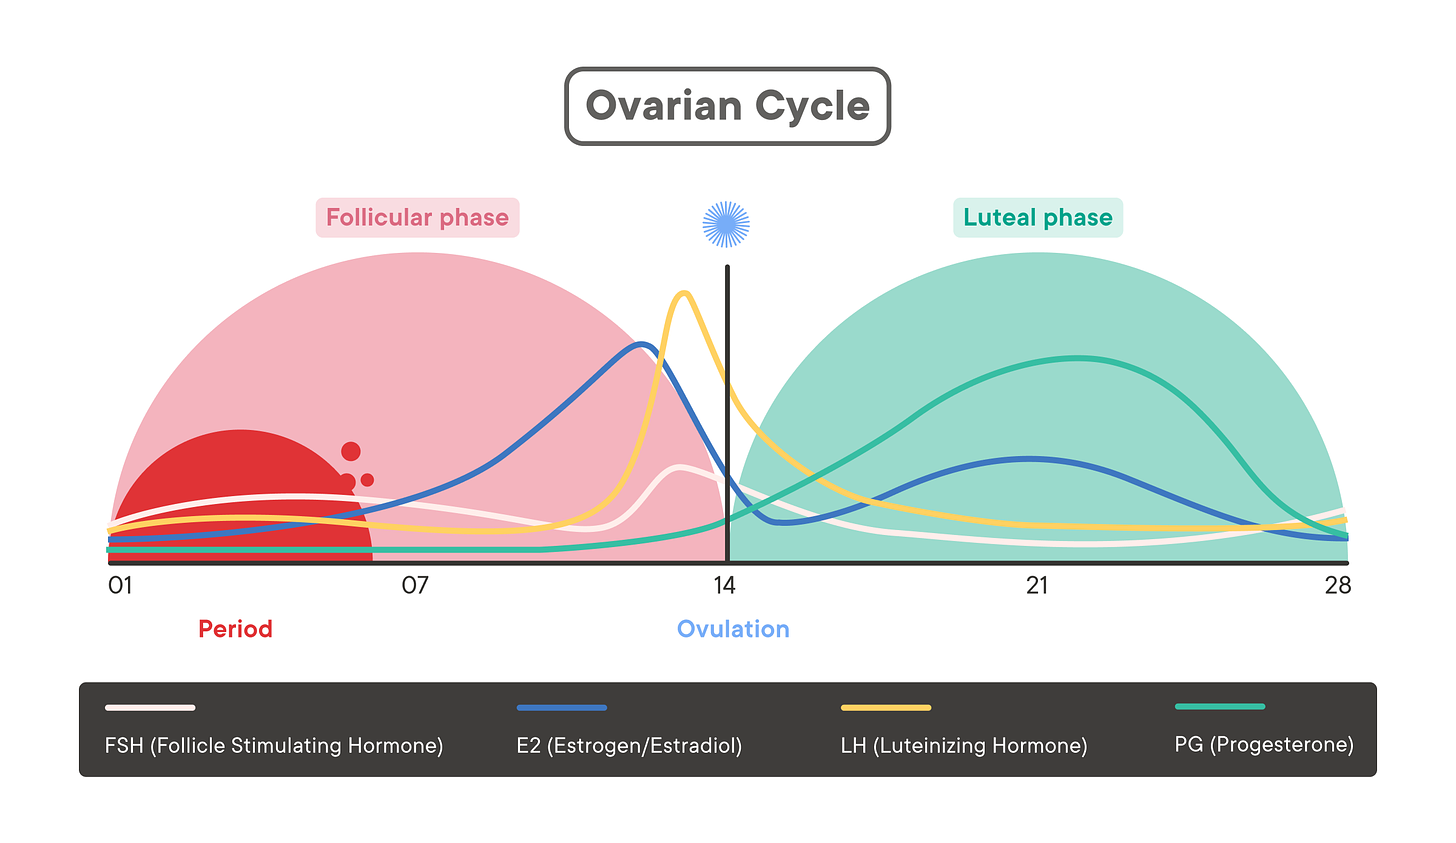 The Menstrual Cycle: Phases of Your Cycle